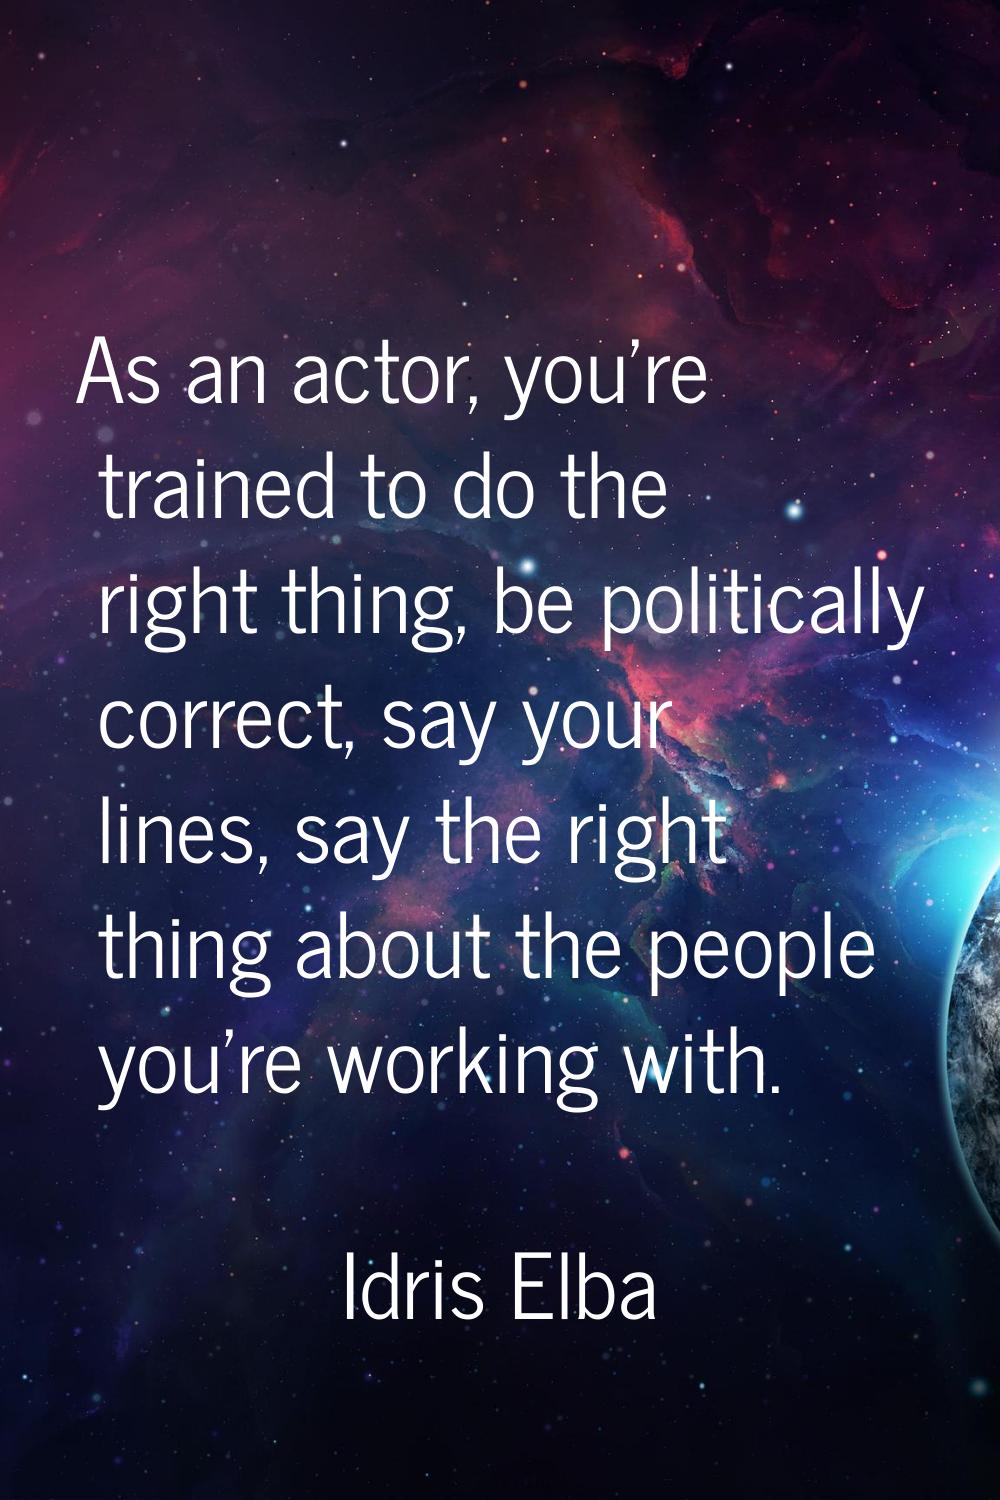 As an actor, you're trained to do the right thing, be politically correct, say your lines, say the 